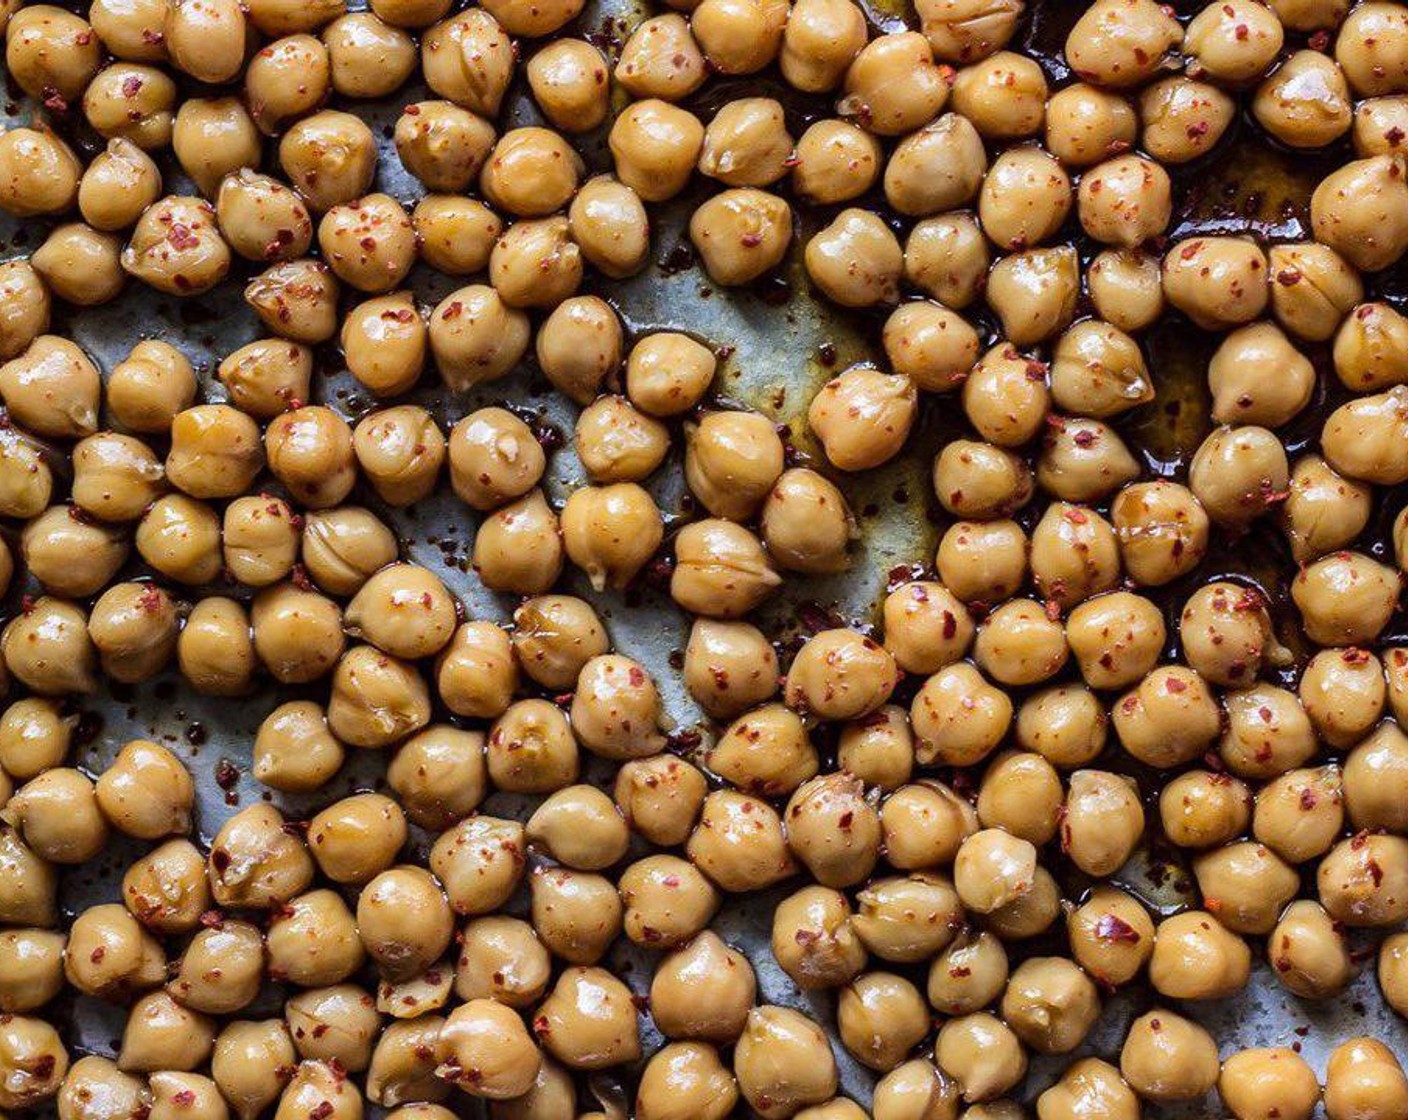 step 3 Drain the Chickpeas (2 cans) and toss in a bowl with Tamari Soy Sauce (3 Tbsp), Granulated Sugar (3 Tbsp), Neutral Oil (2 Tbsp), Ground Ginger (1 tsp), Crushed Red Pepper Flakes (1 tsp).